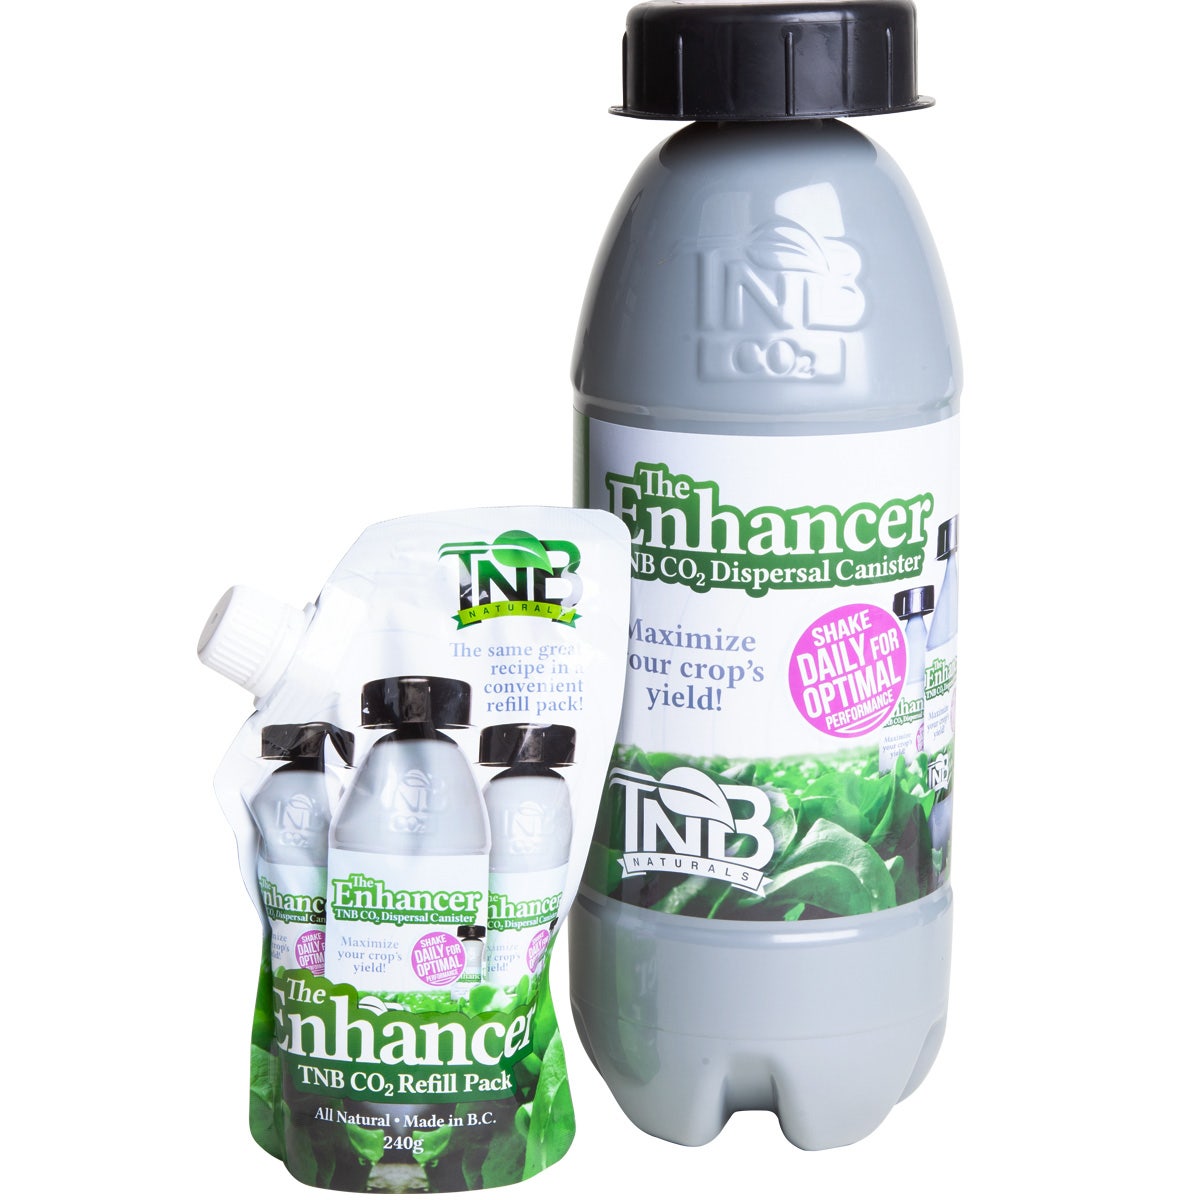 TNB Naturals - The Enhancer CO2 Canister